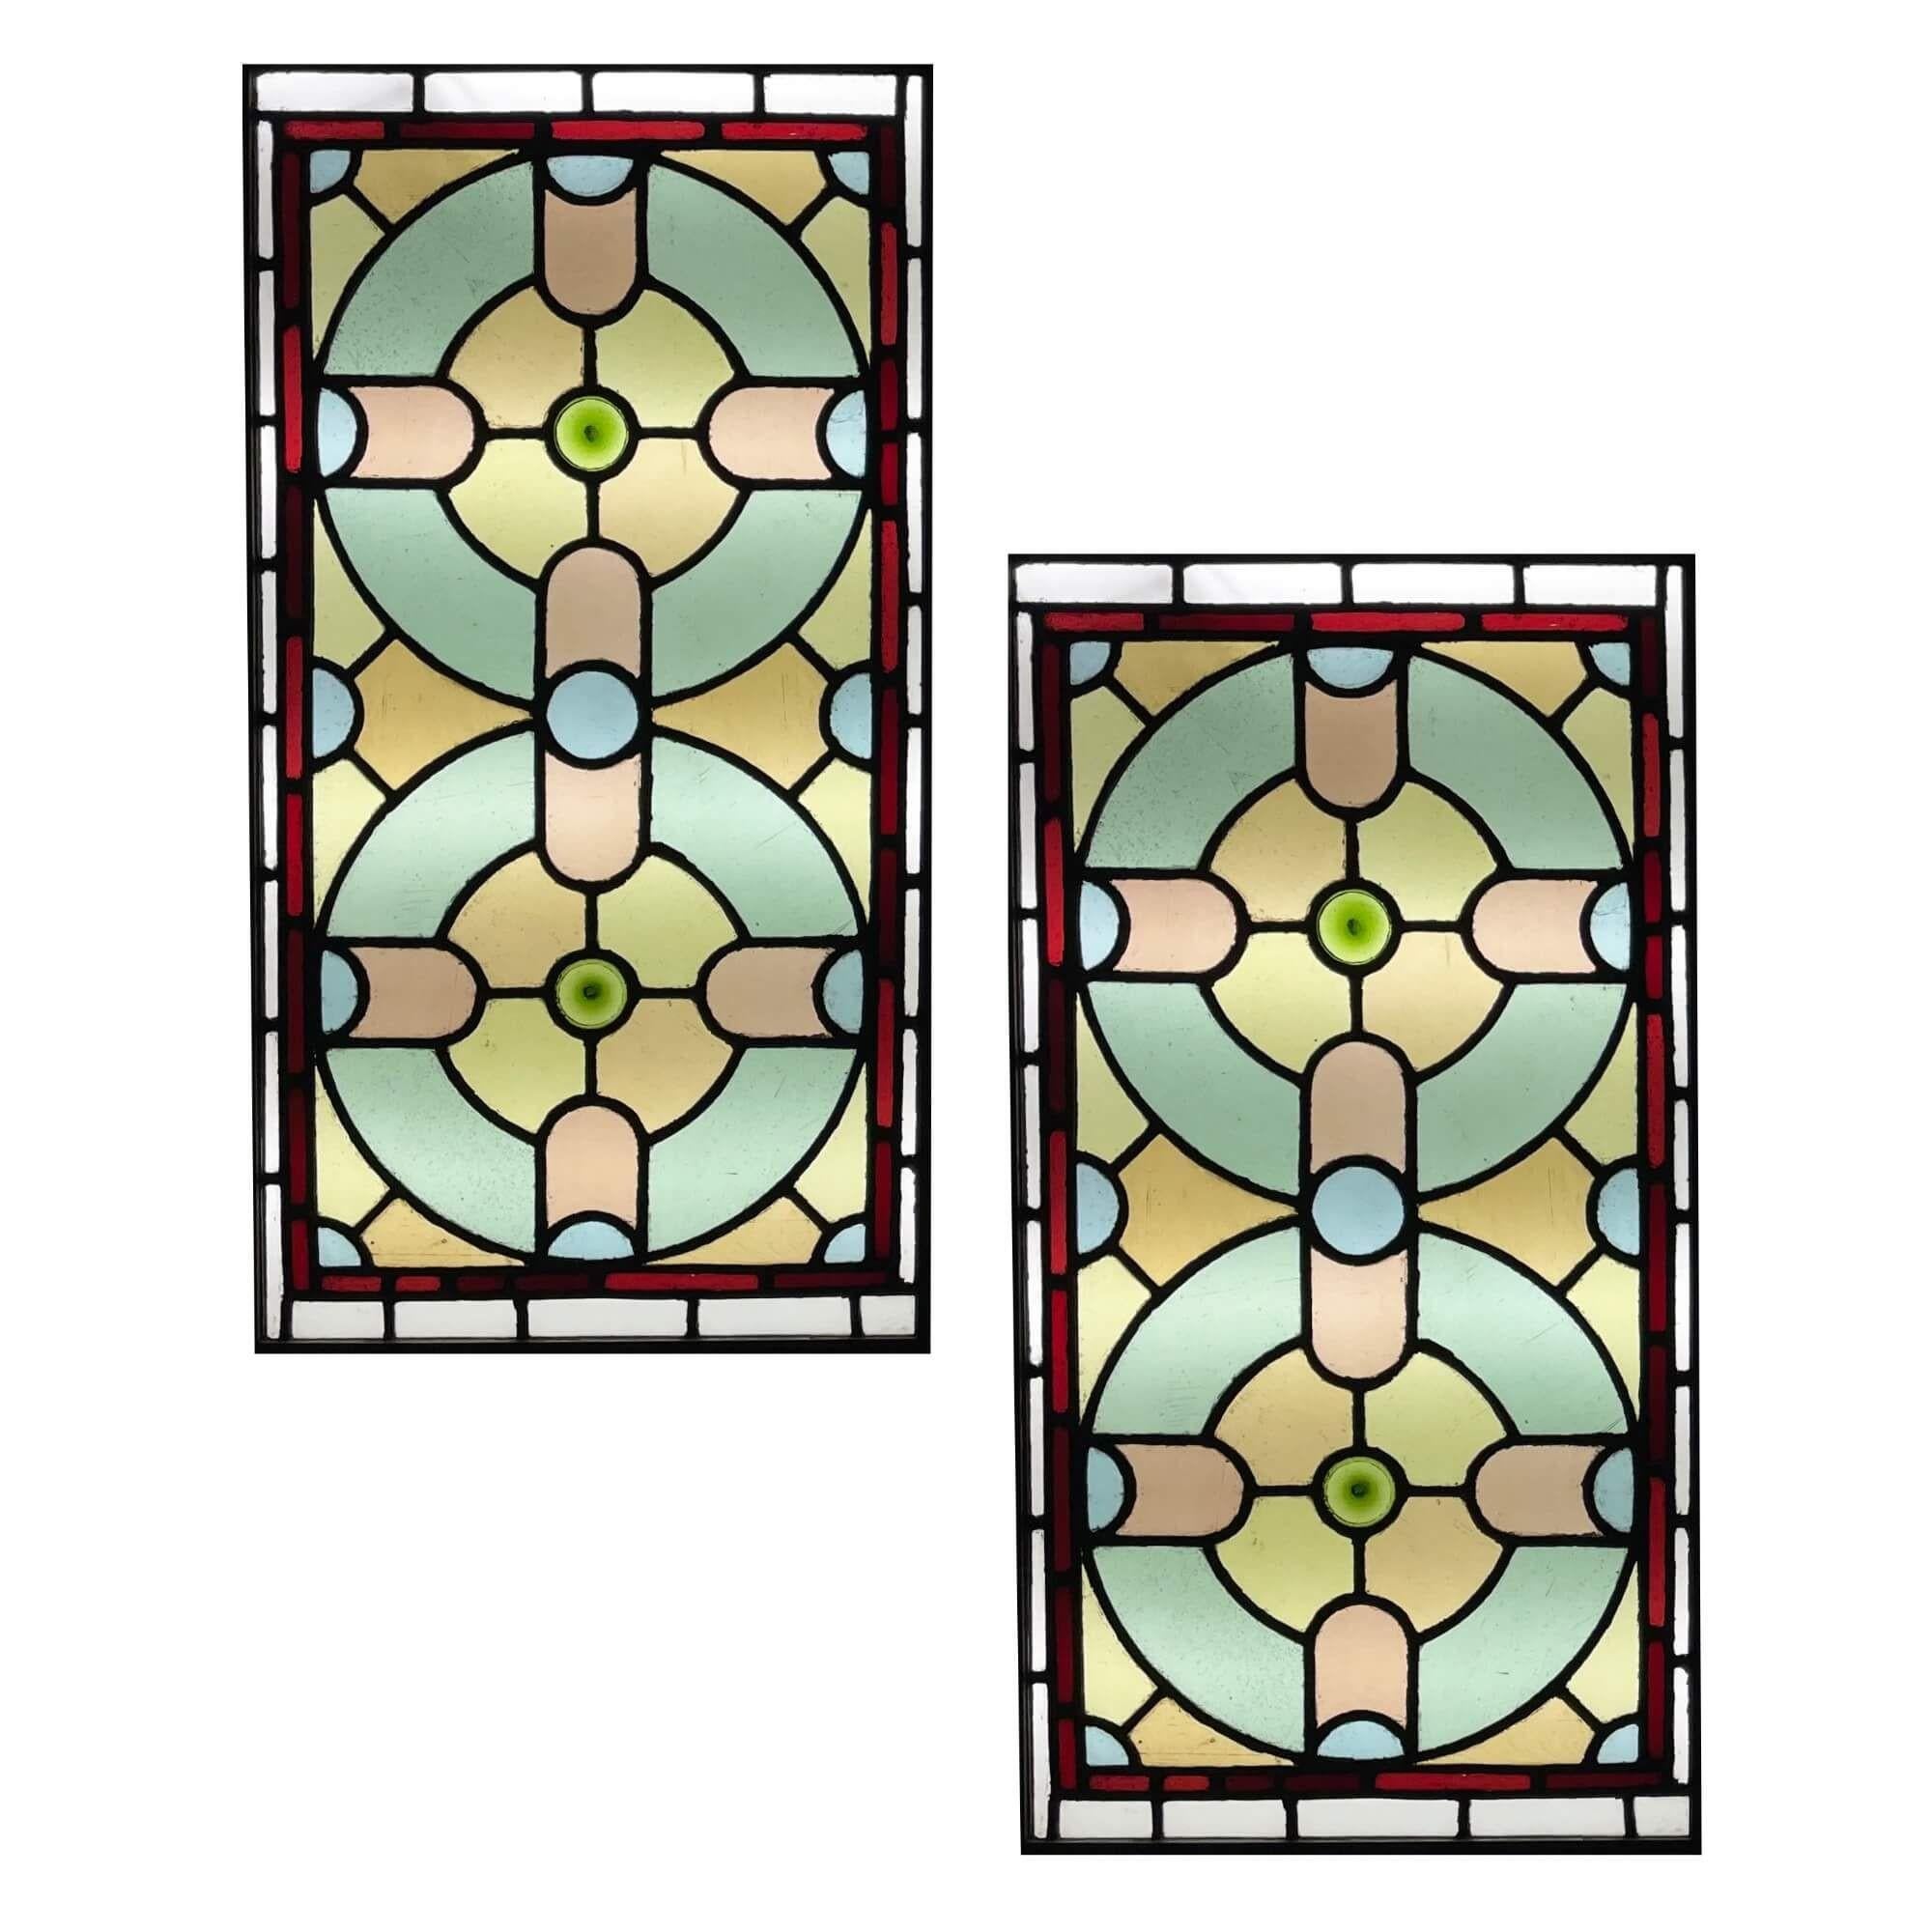 A pair of late Victorian stained glass window panels originating from England, circa 1900. These colourful stained glass windows are tall in scale and are currently fixed into wooden frames. The panels are decorated with shapes that morph into one